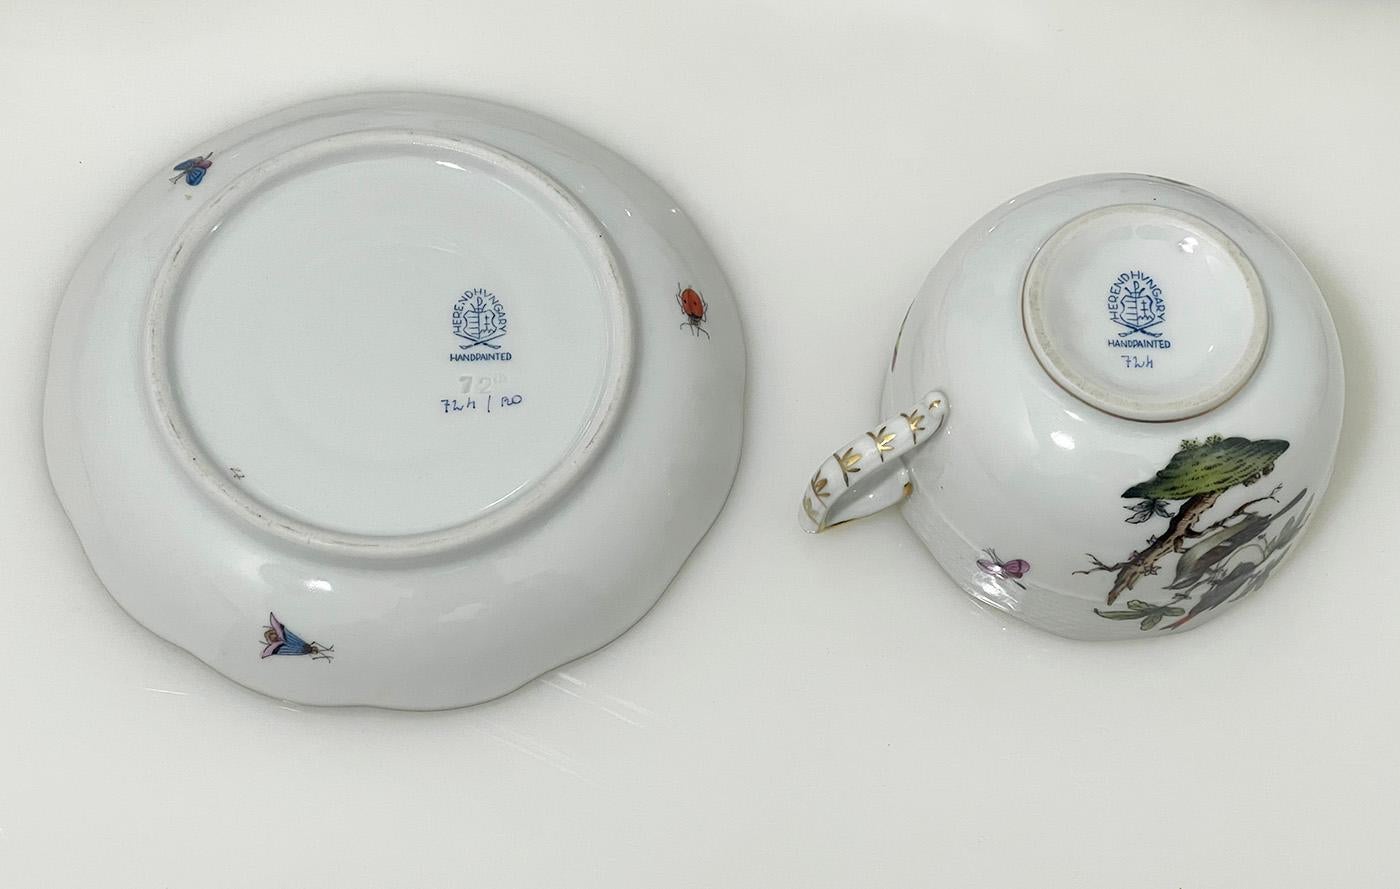 Herend Hungary Porcelain 